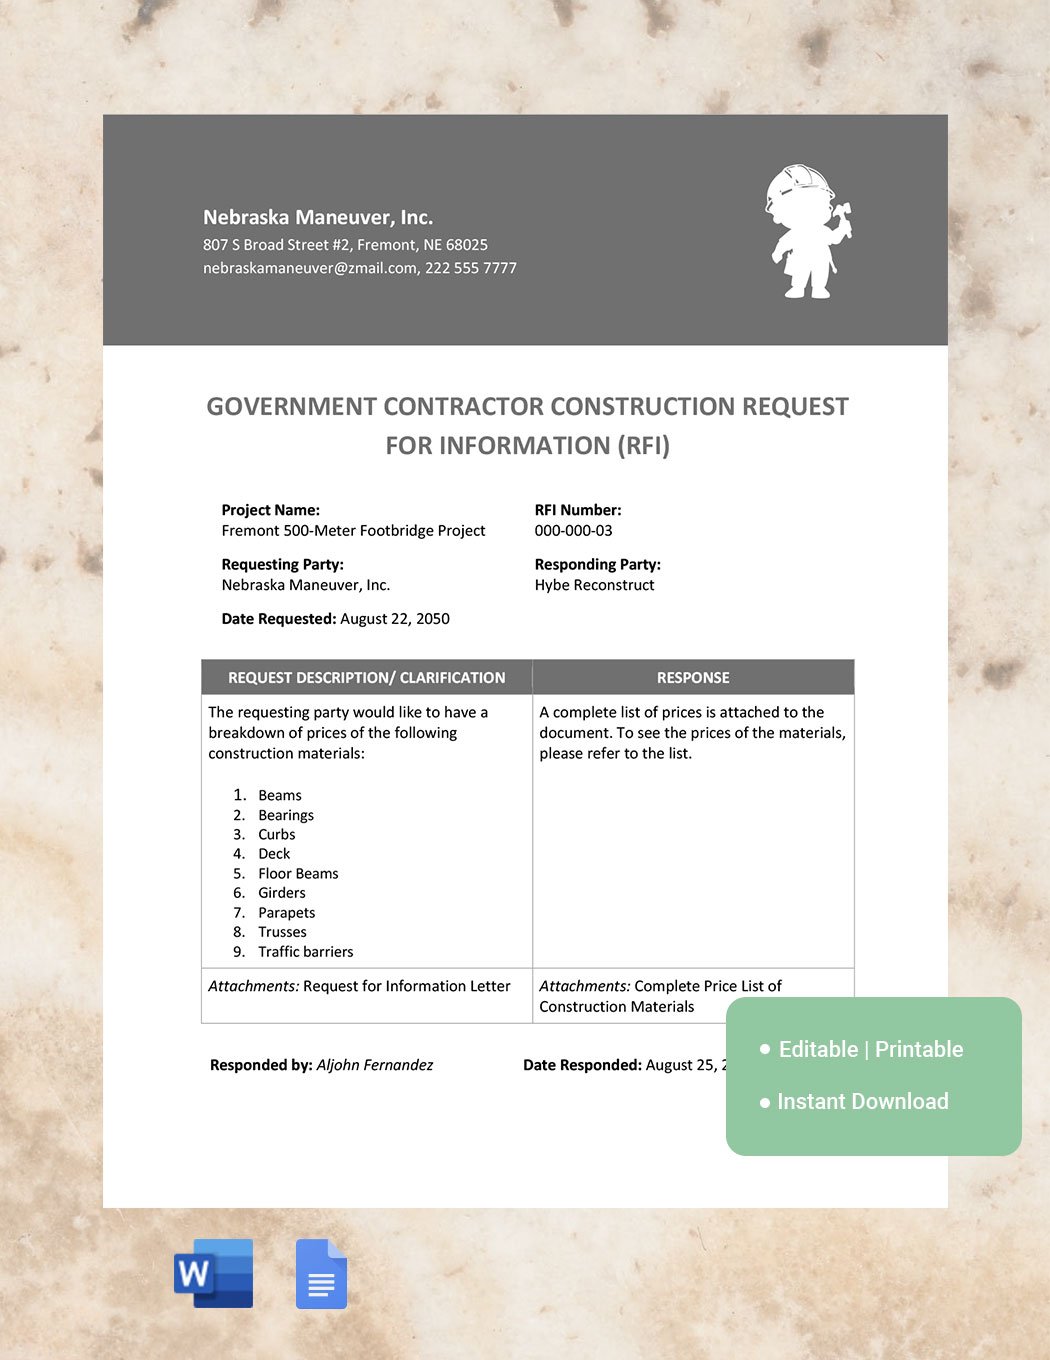 Government Contractor Construction Request For Information Template